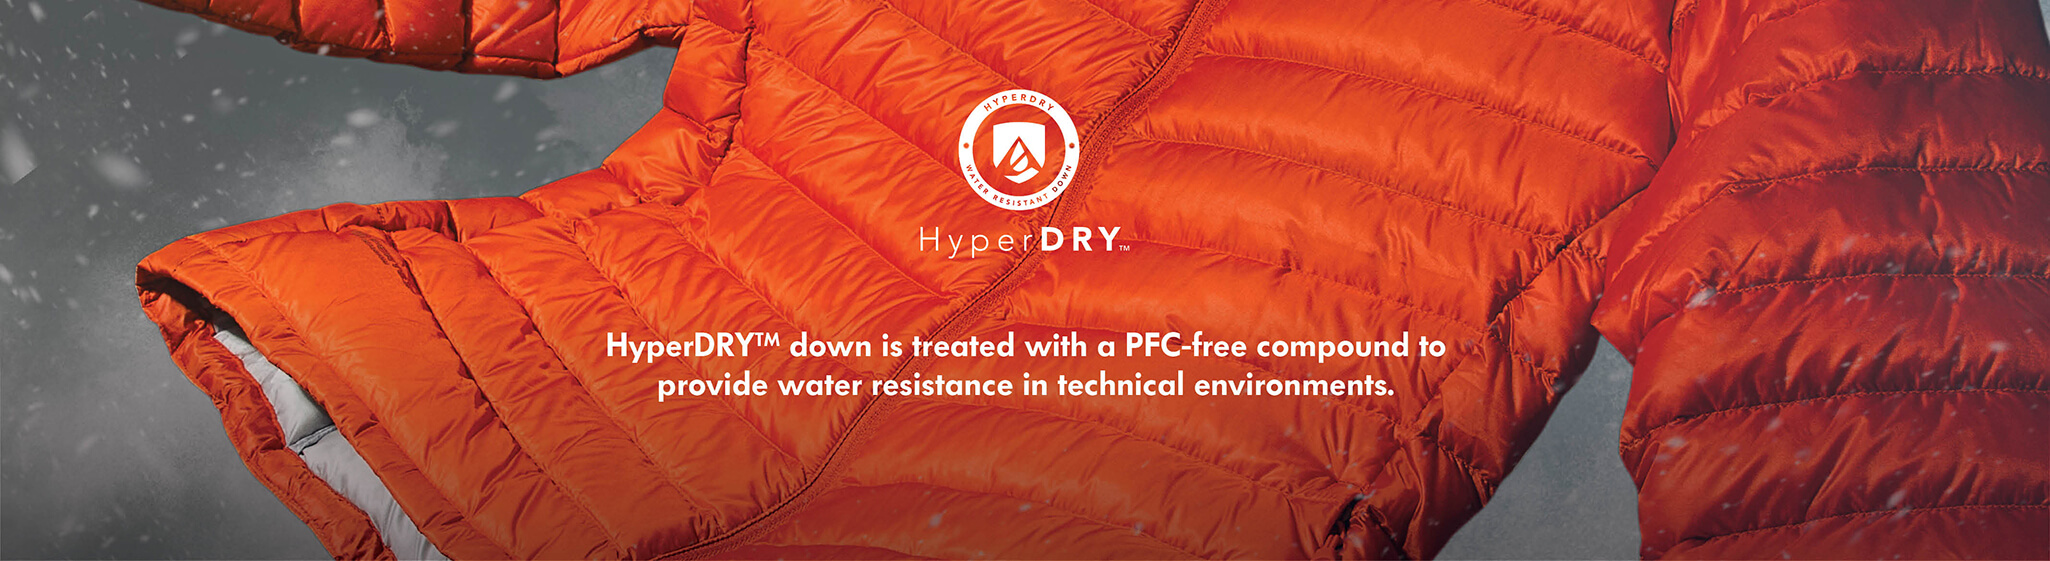 Hyper Dry, stay dry when it's wet, with HyperDRY - Technical, water-resistant down - free from flurocarbons